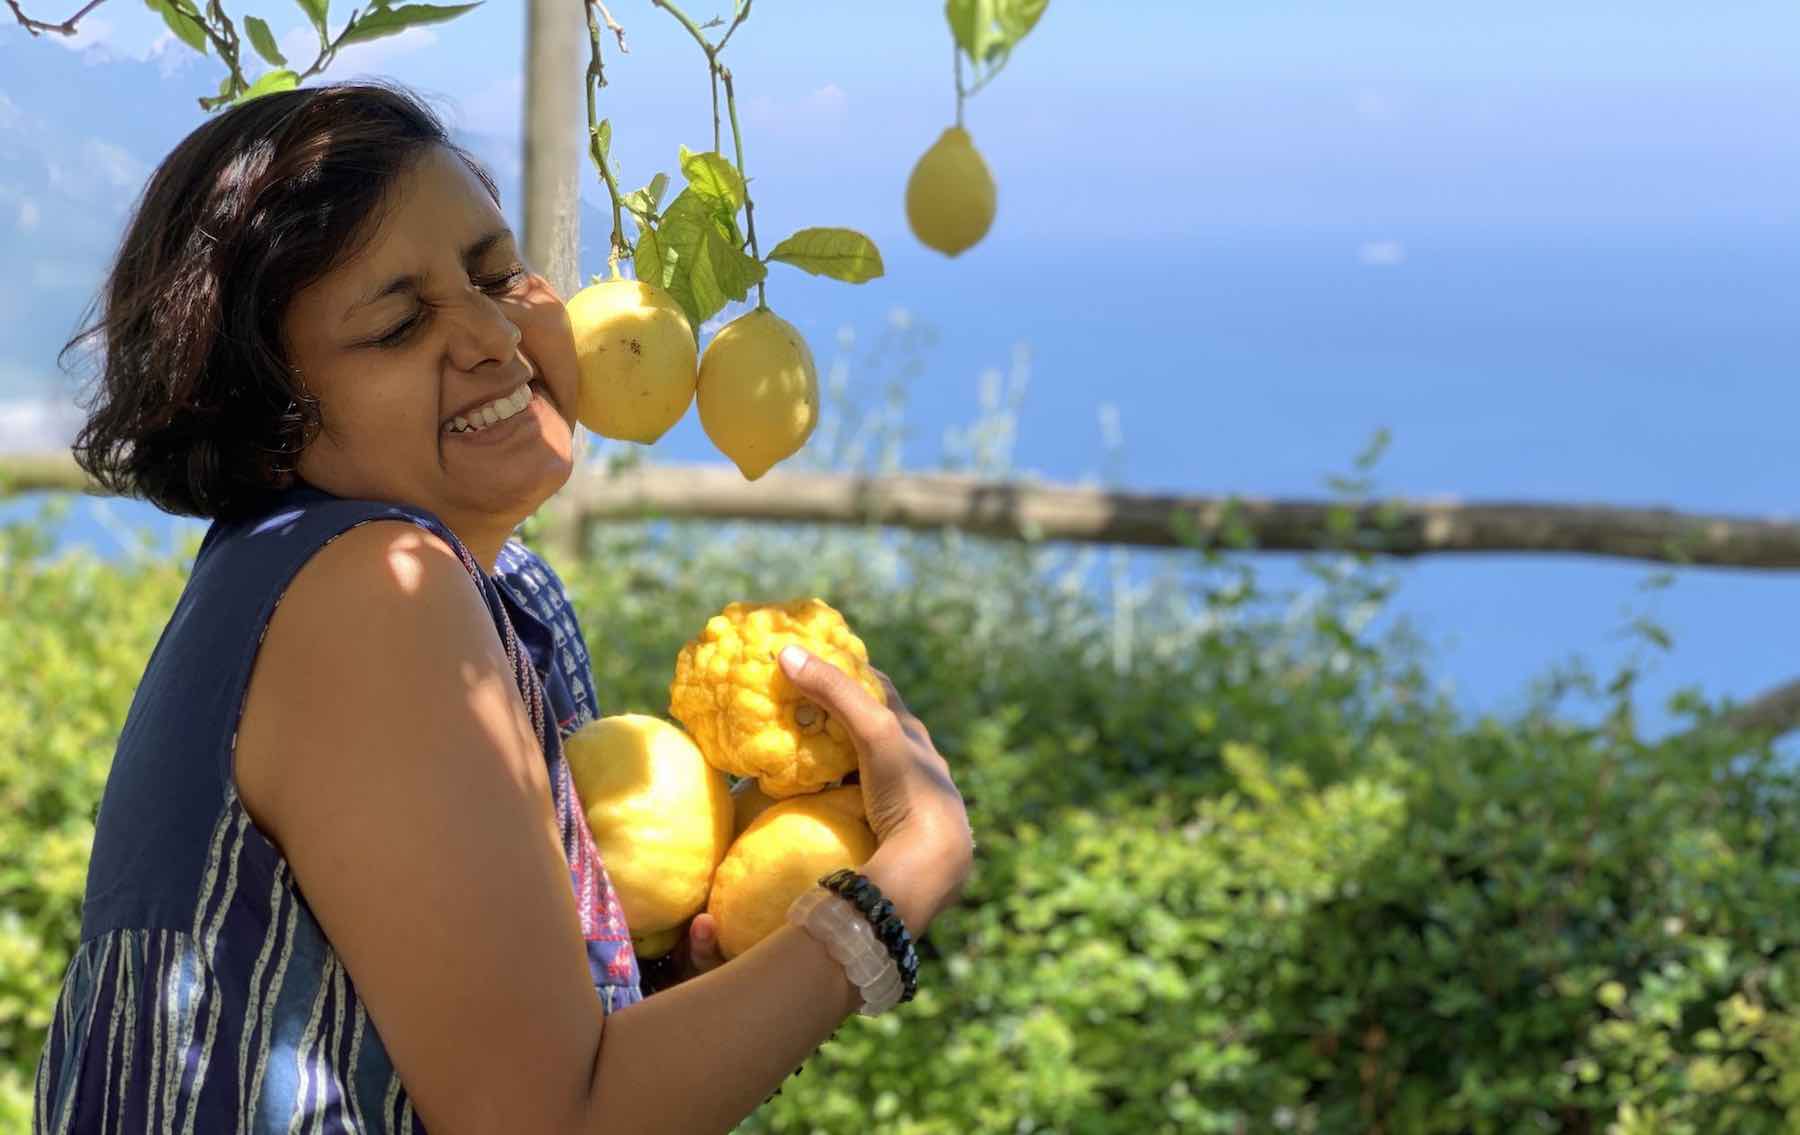 Susmitha, short haired Indian lady. Holding lemons tightly in a hug and pressing cheek to lemons on a tree with eyes closed and smiling happily. Greenery, water and blue skies in the background.